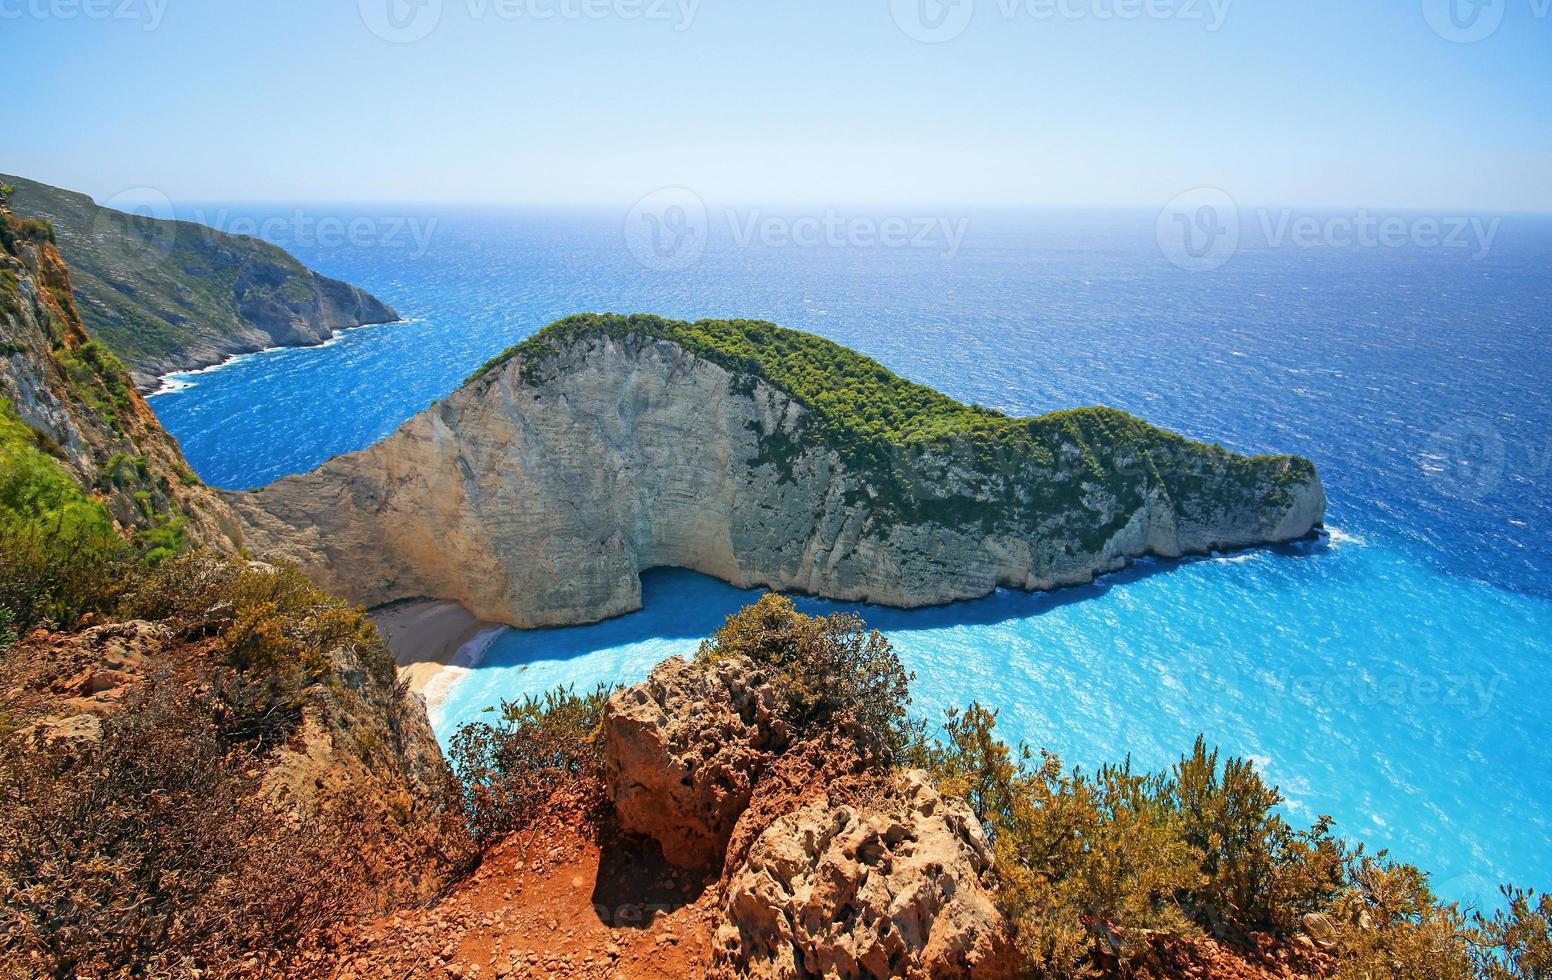 Navagio Beach: Day Tour of Shipwreck Beach & the Blue Caves | GetYourGuide